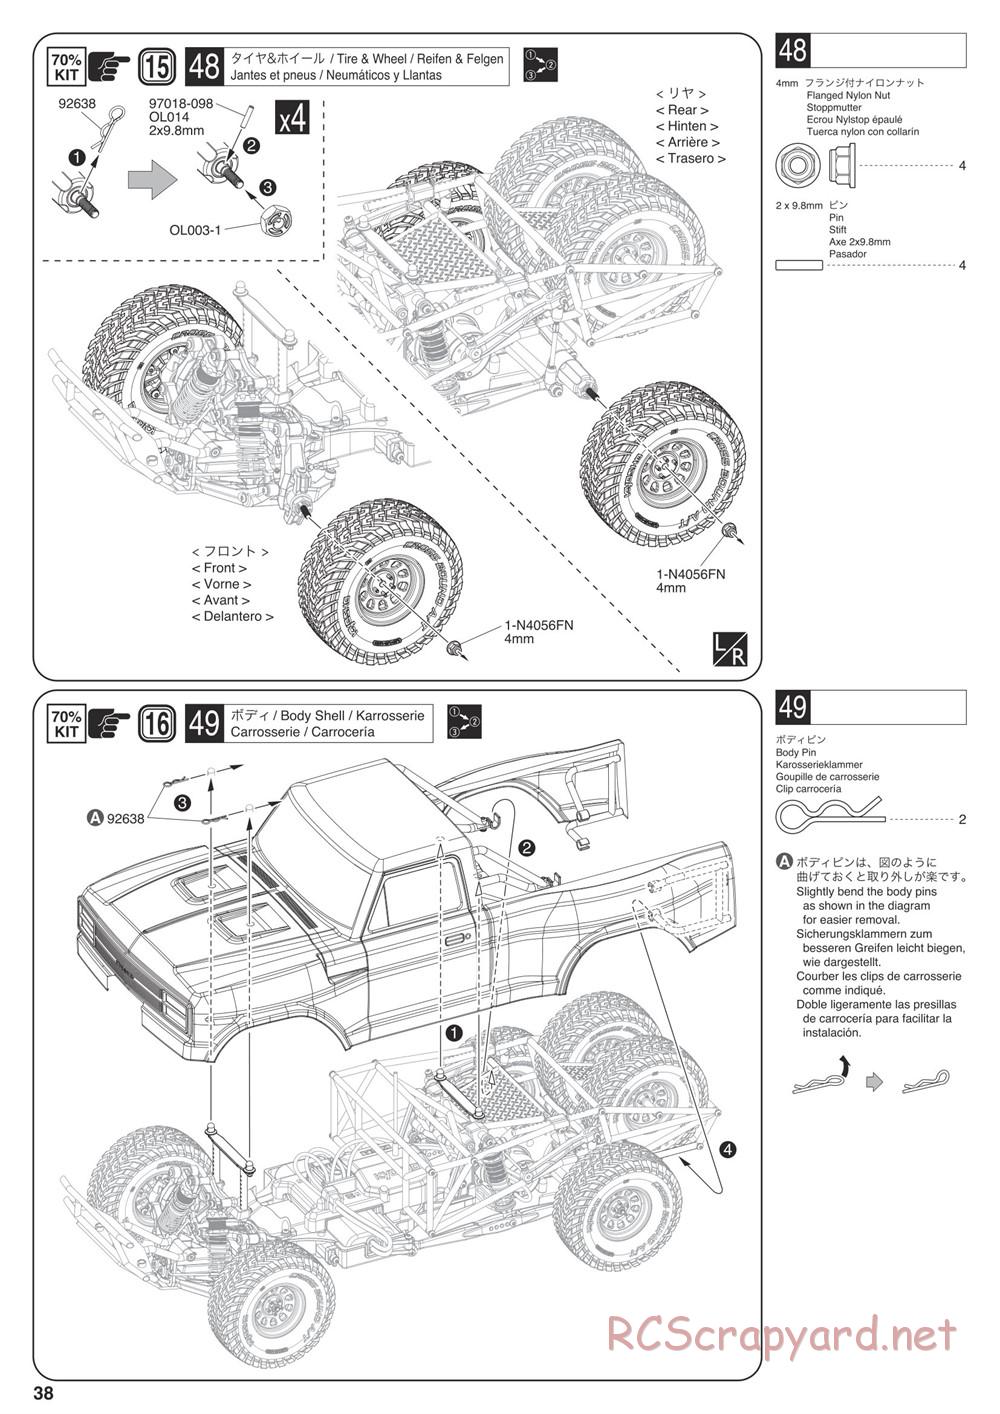 Kyosho - Outlaw Rampage Pro - Manual - Page 38